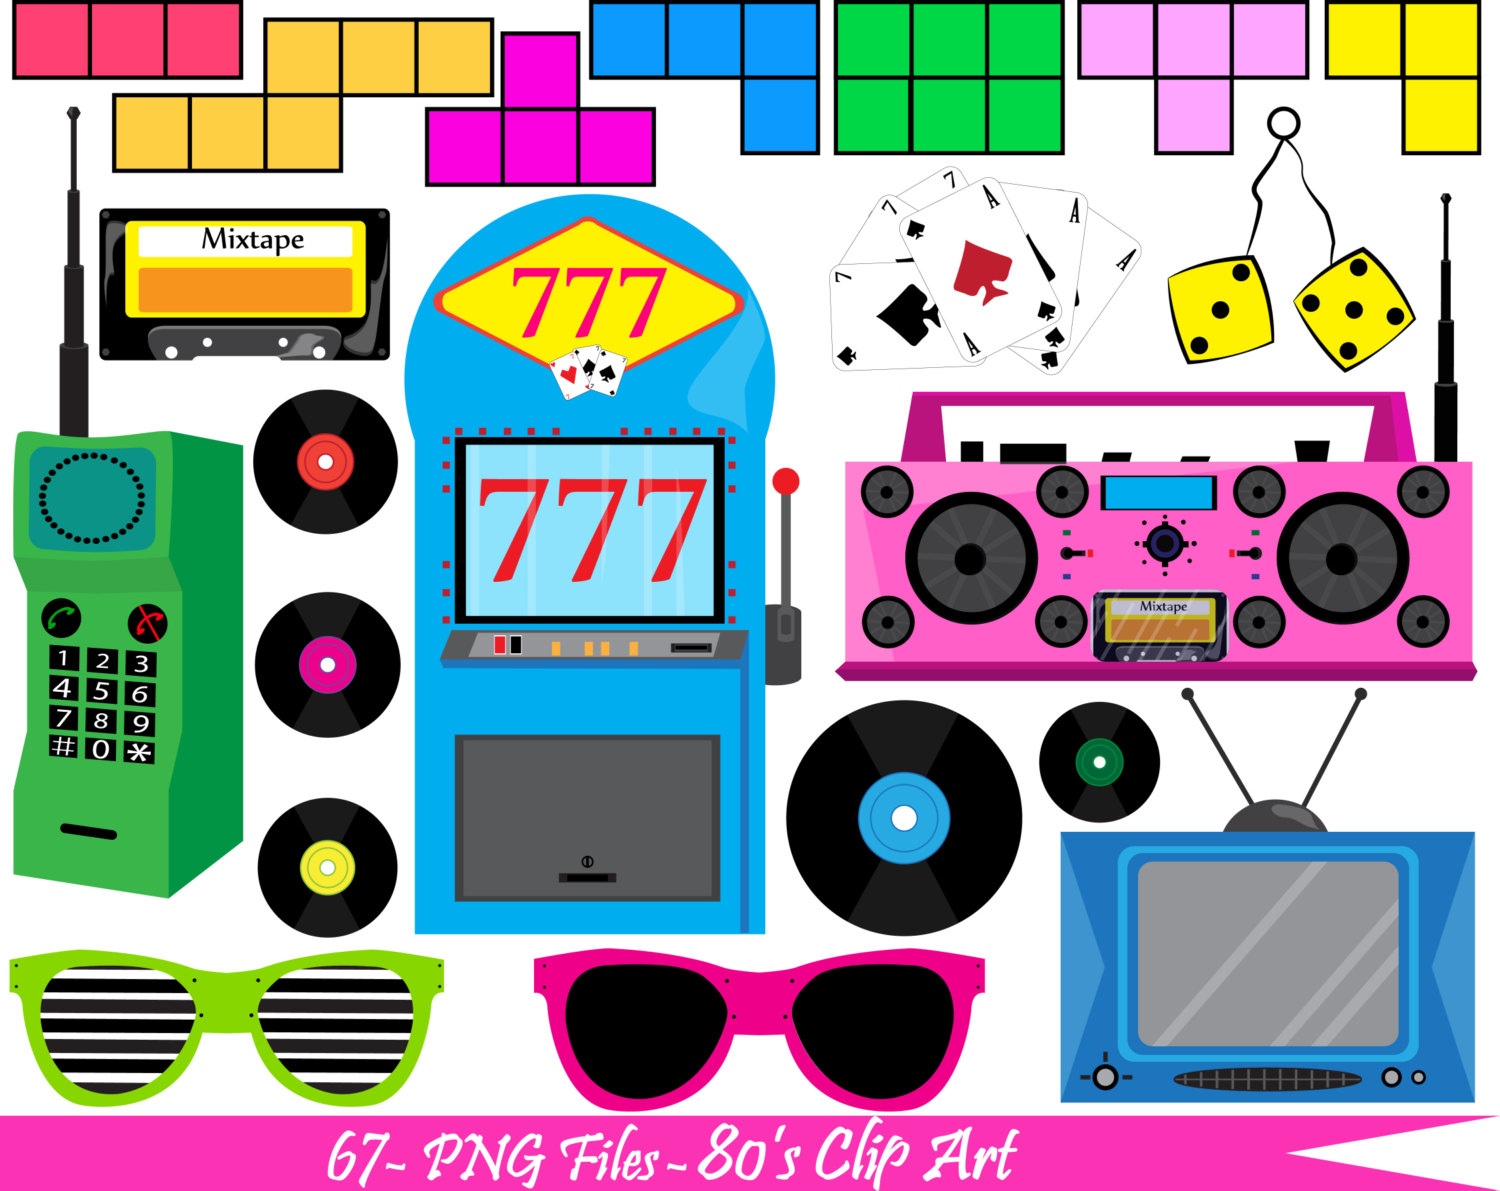 80s clipart - Clipground